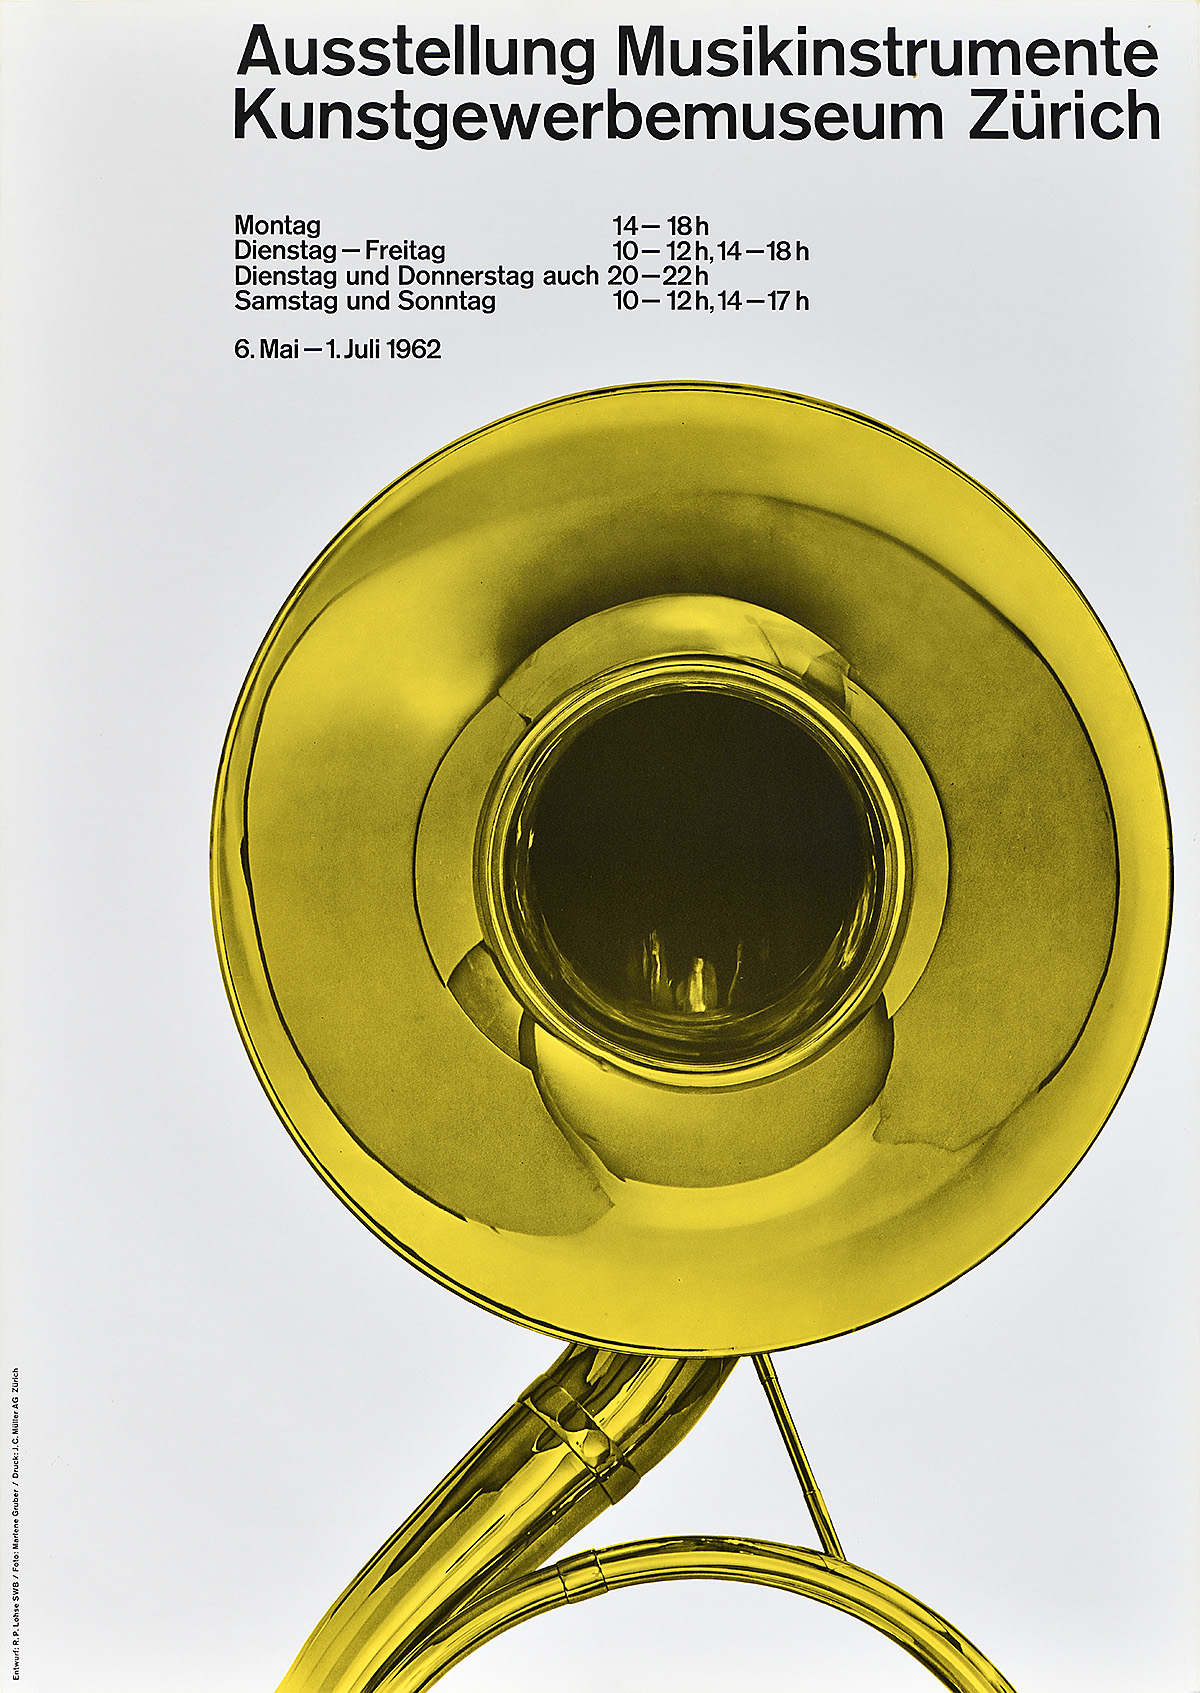 A poster for a music festival displaying an image of a french horn.